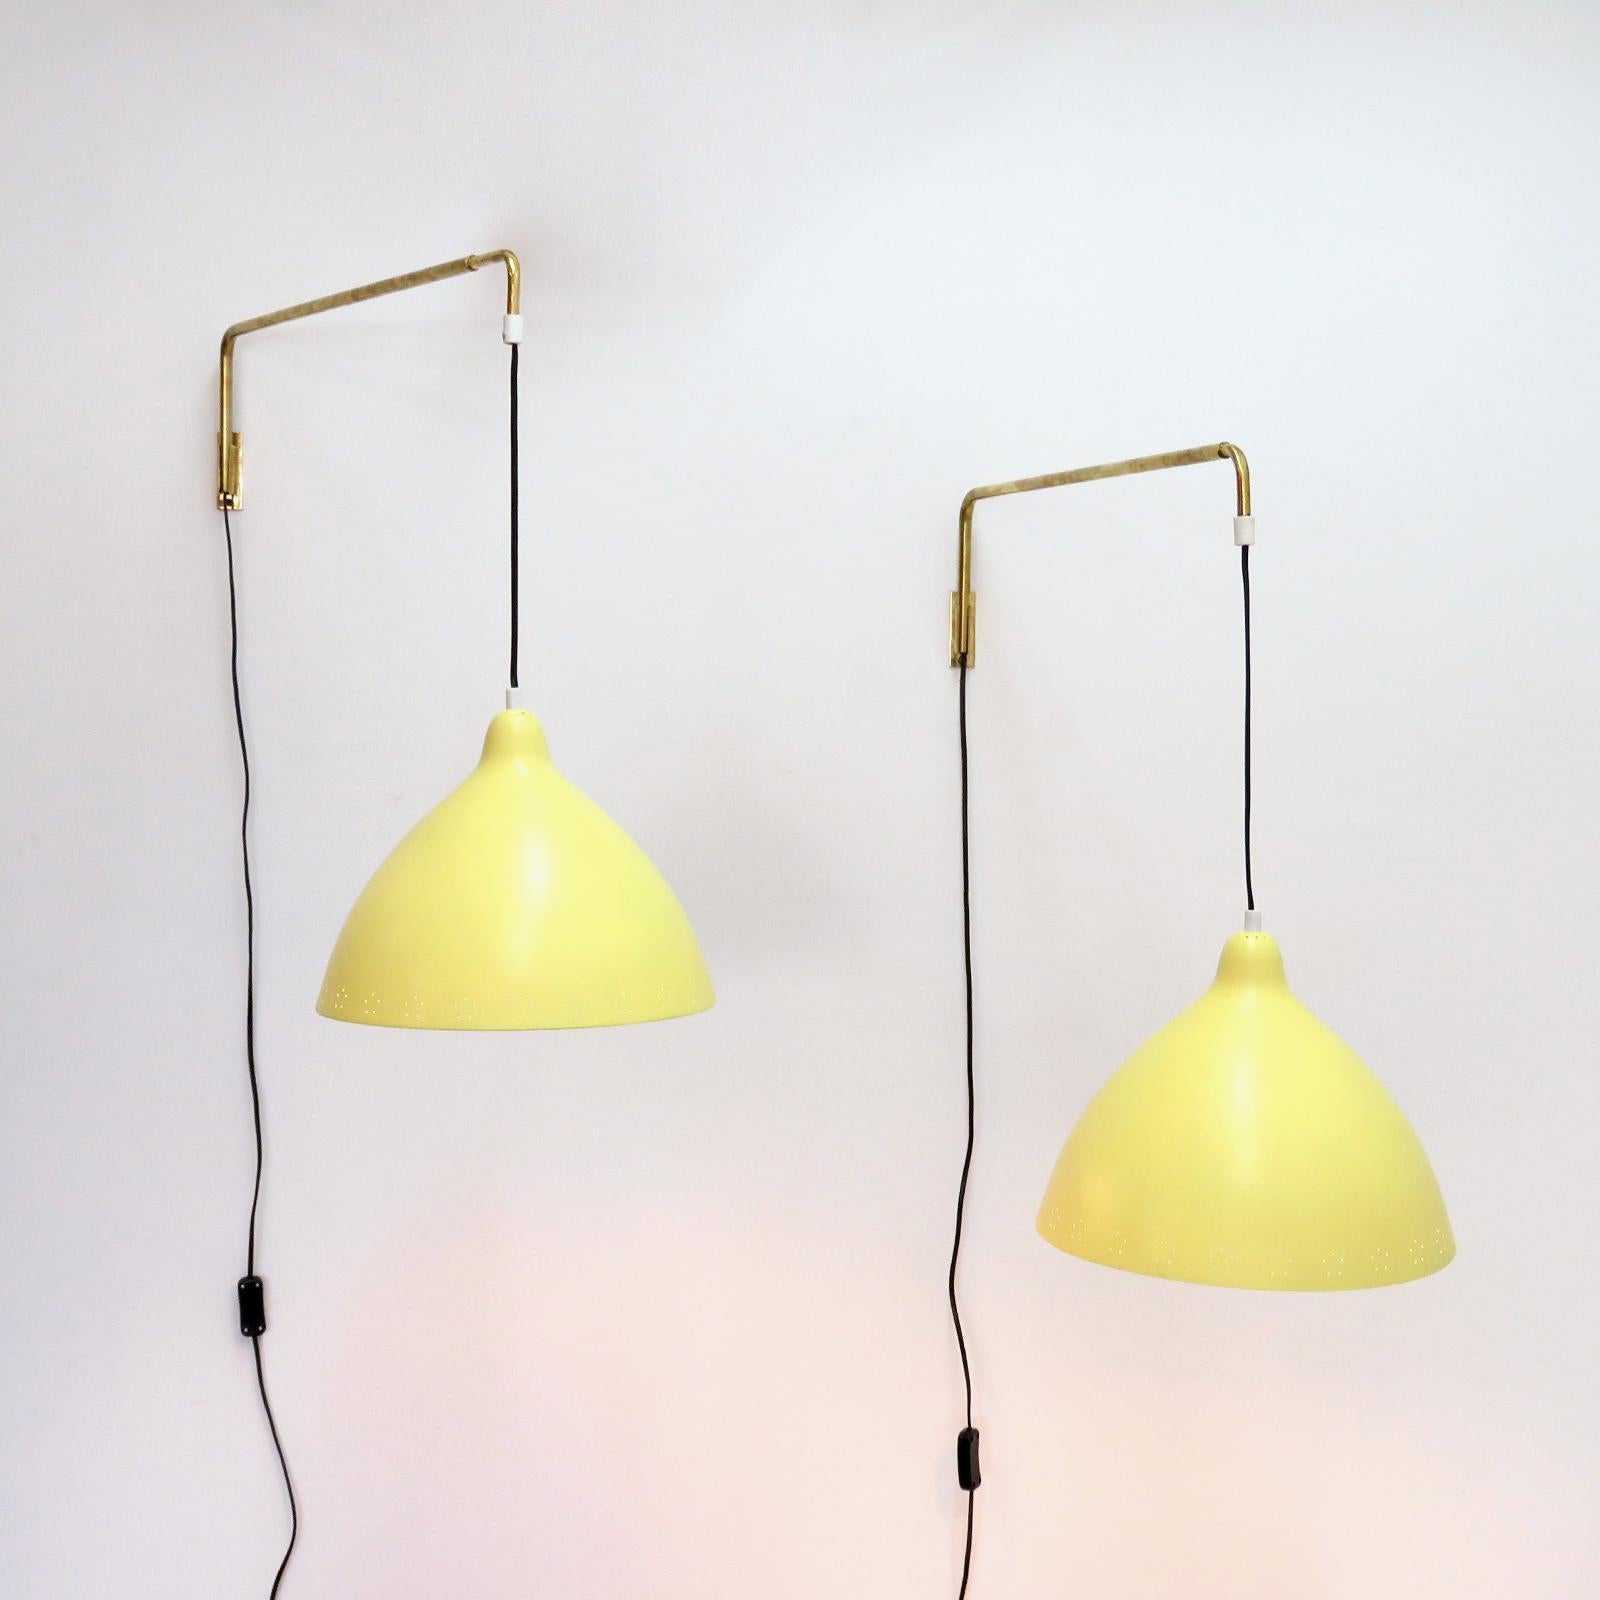 Mid-20th Century Swing Arm Wall Lights by Lisa Johansson-Pape for Orno, 1960 For Sale